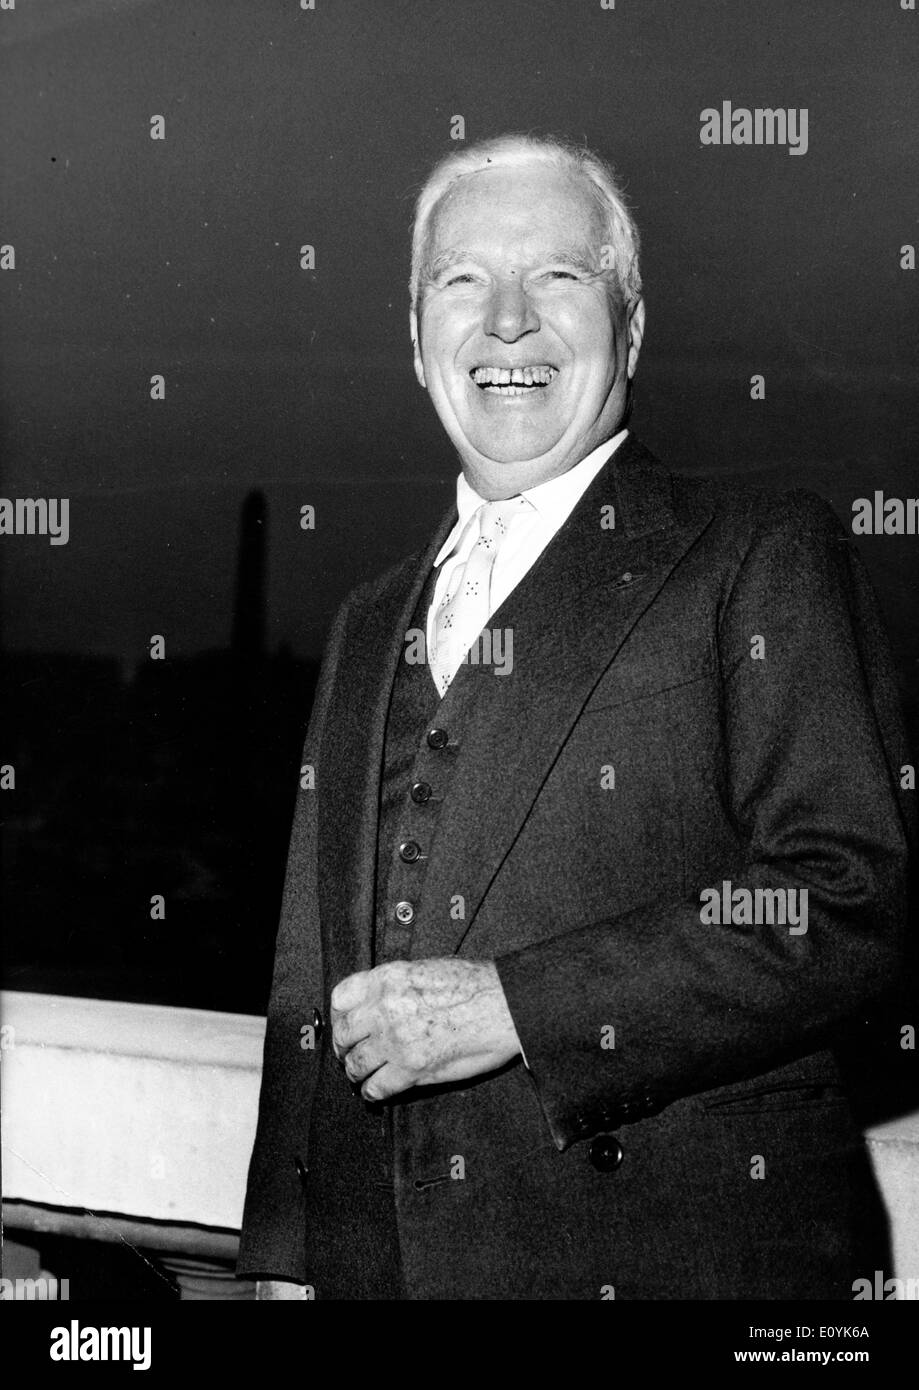 Actor Charlie Chaplin laughing Stock Photo